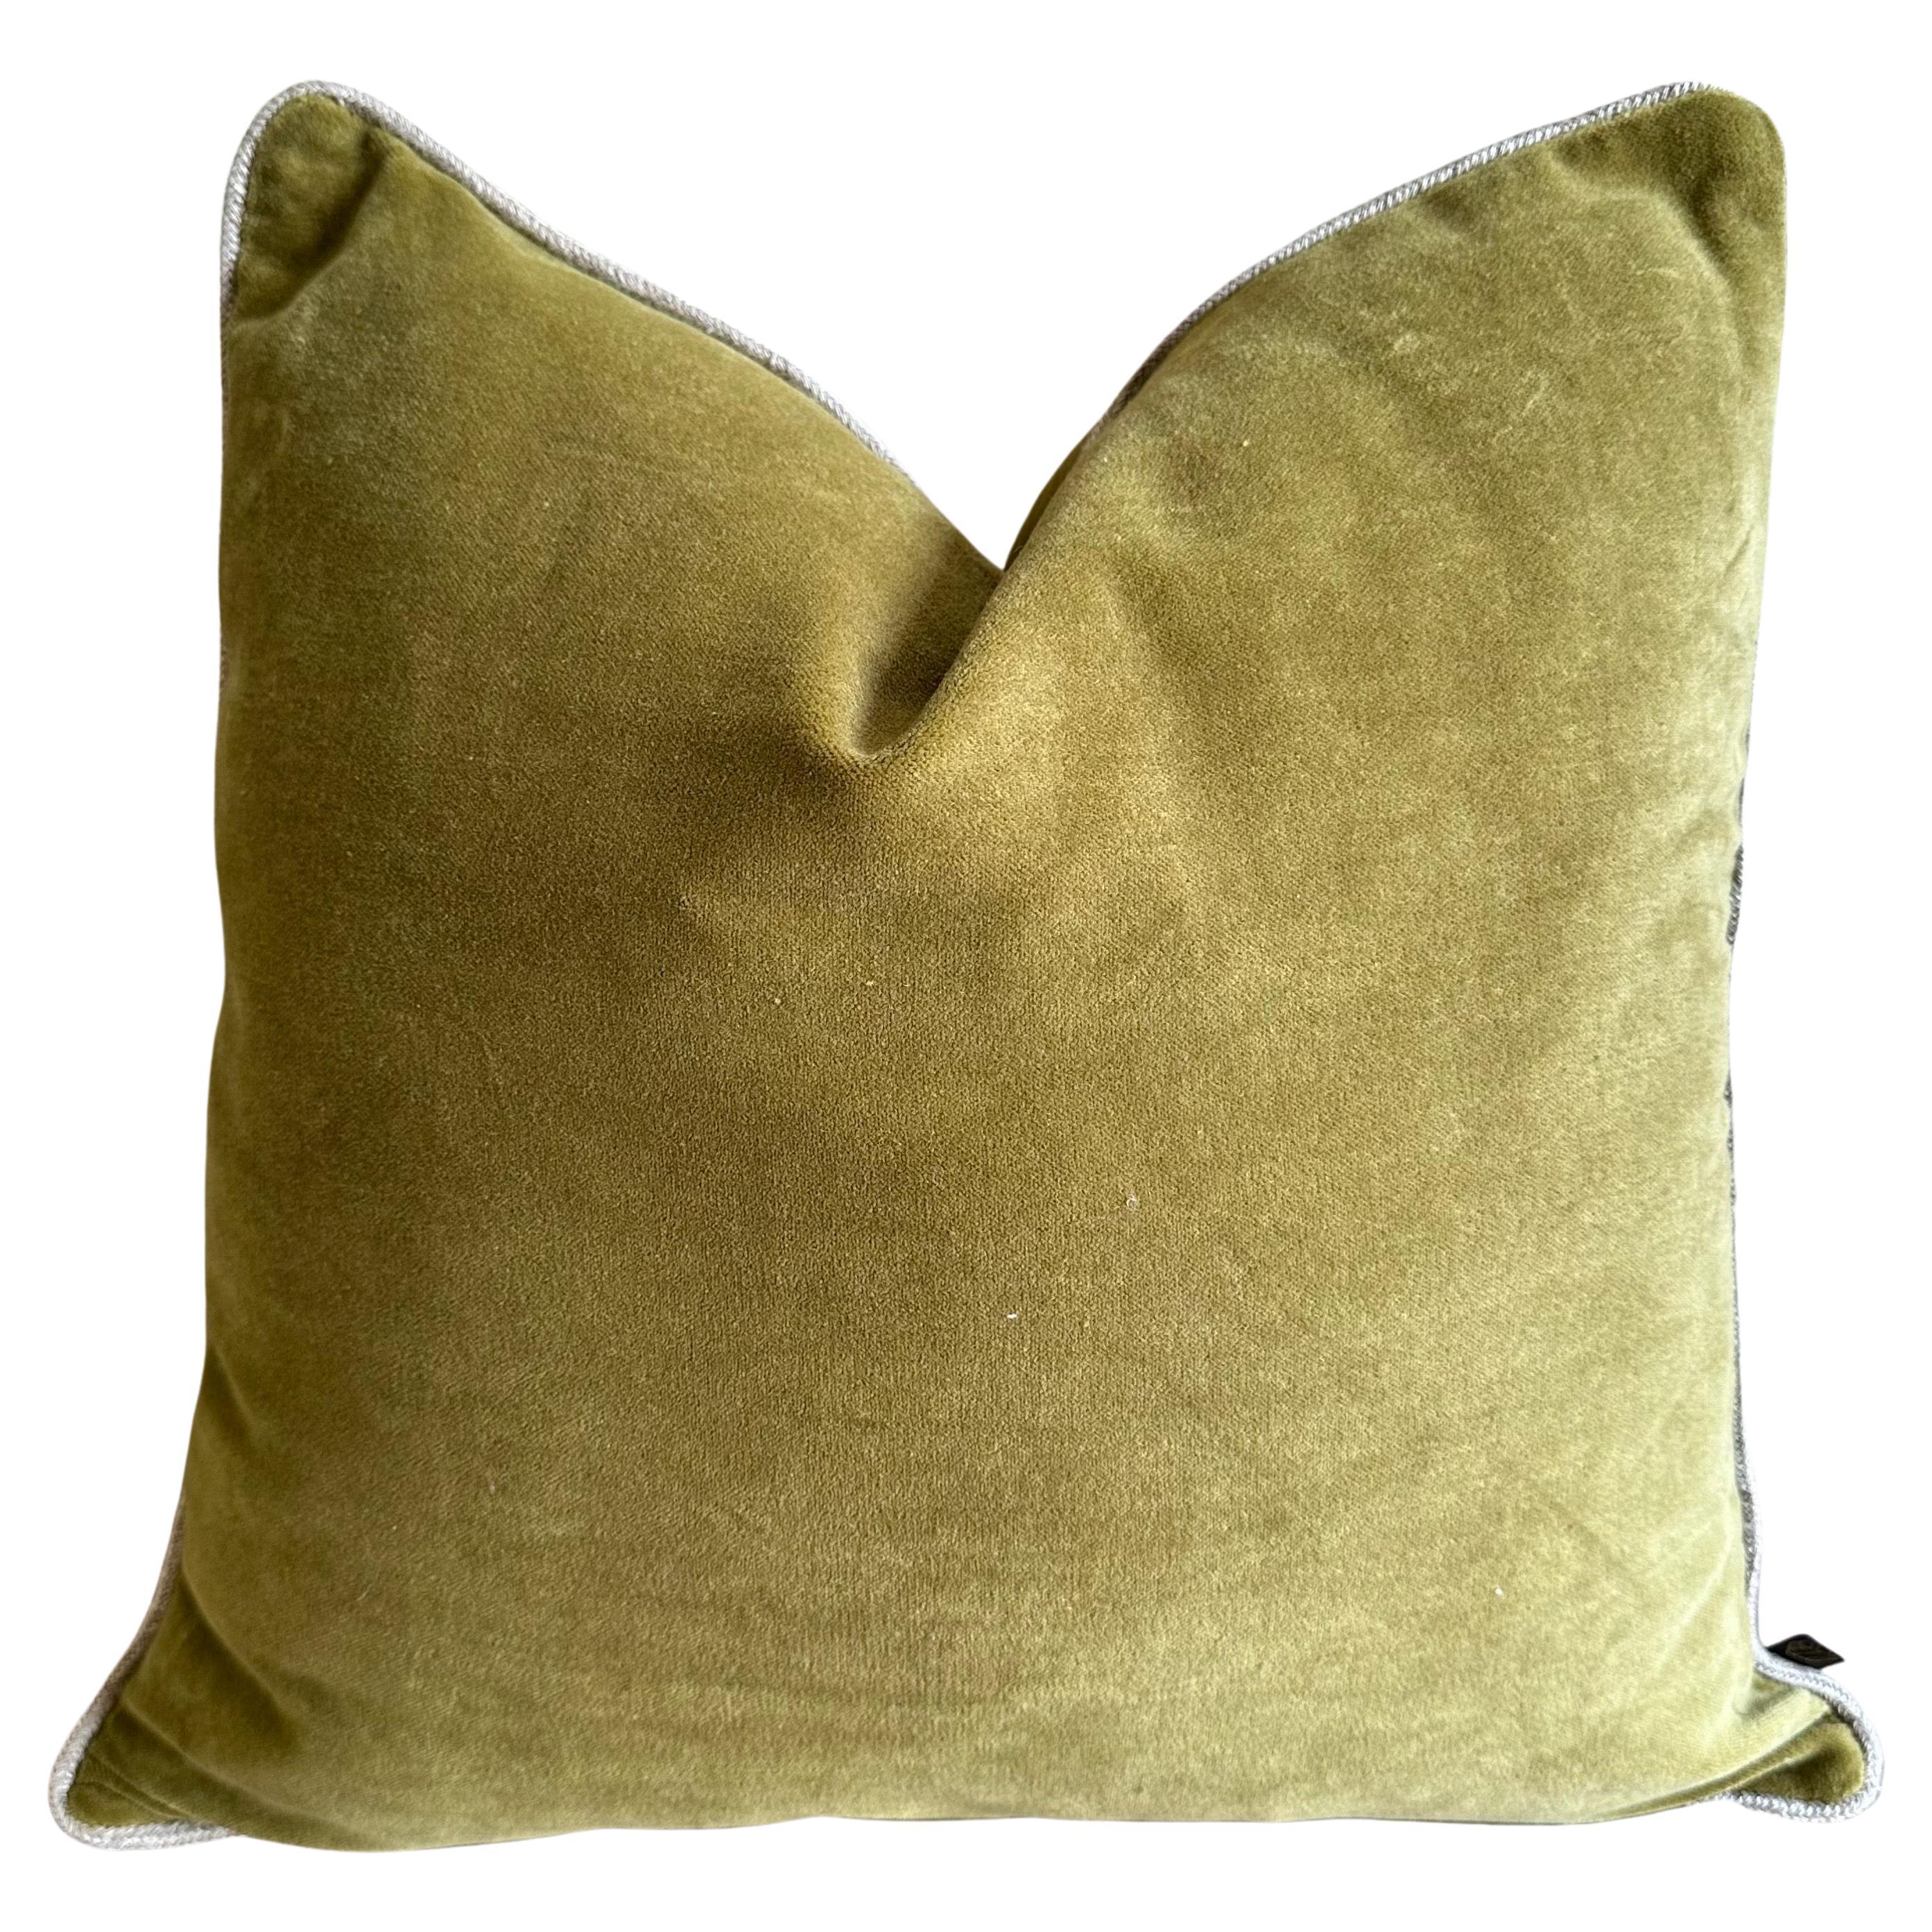 French Cotton Velvet Lumbar Pillow in Olive with Jute Trim